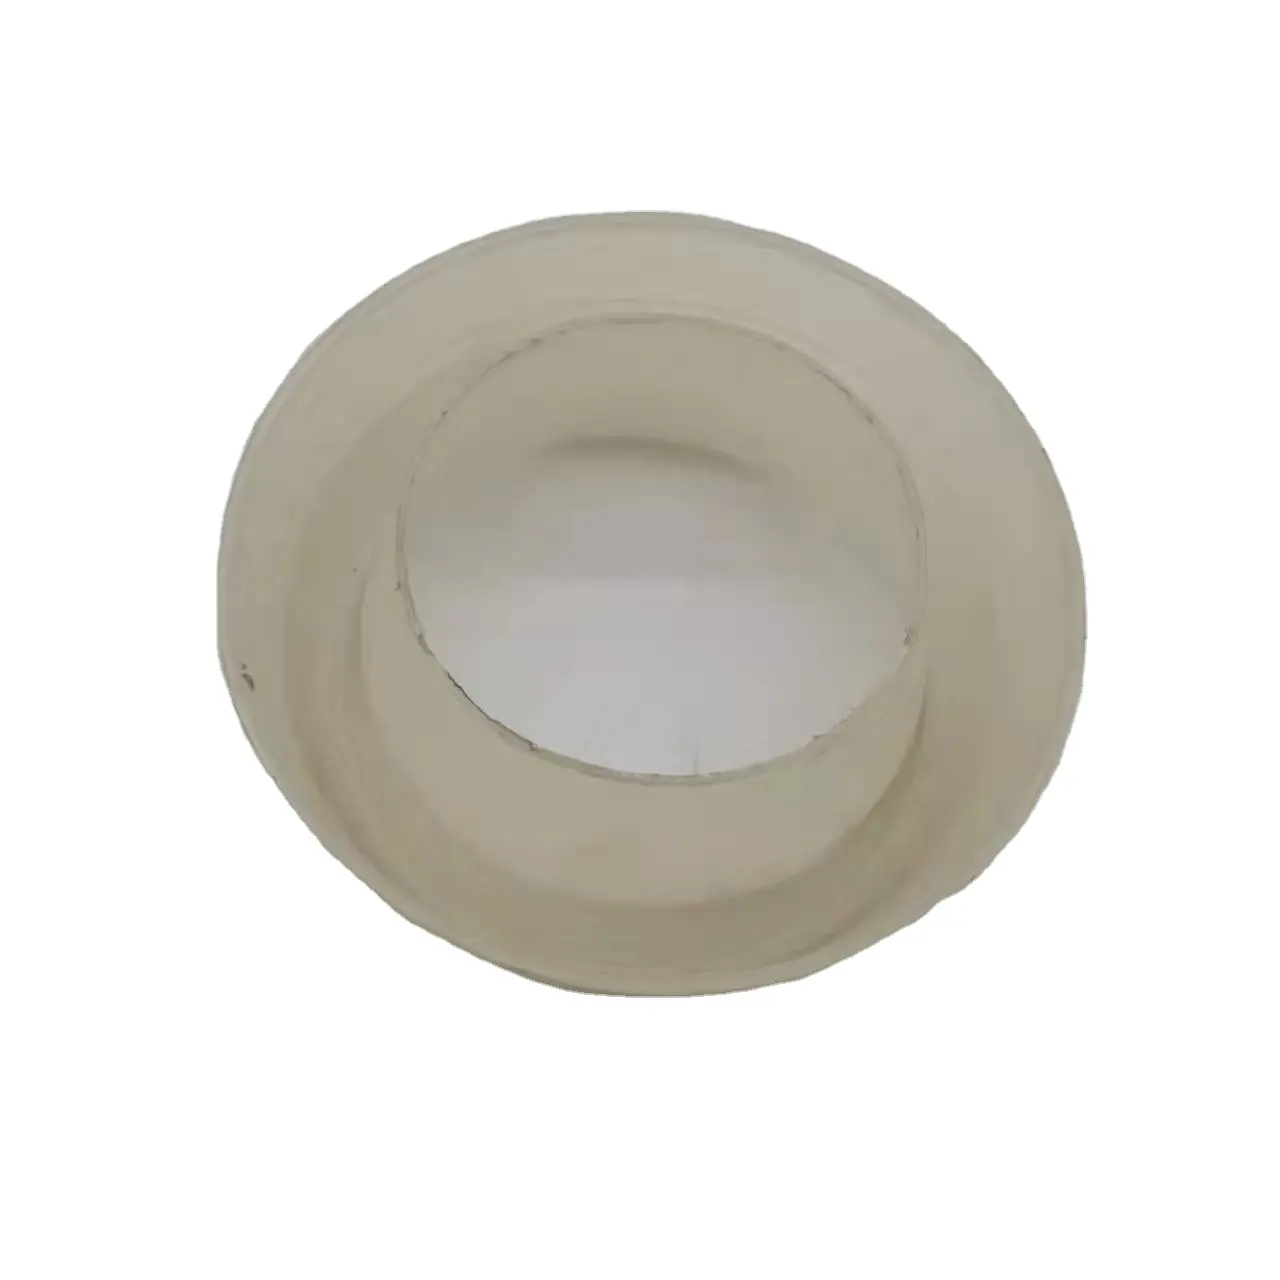 TB550.11E.1.2.2 Anti-Dust Bowl Cover Cup Dust Cup For TB Tractor Accessories agricultural machinery & equipment Farm Tractors